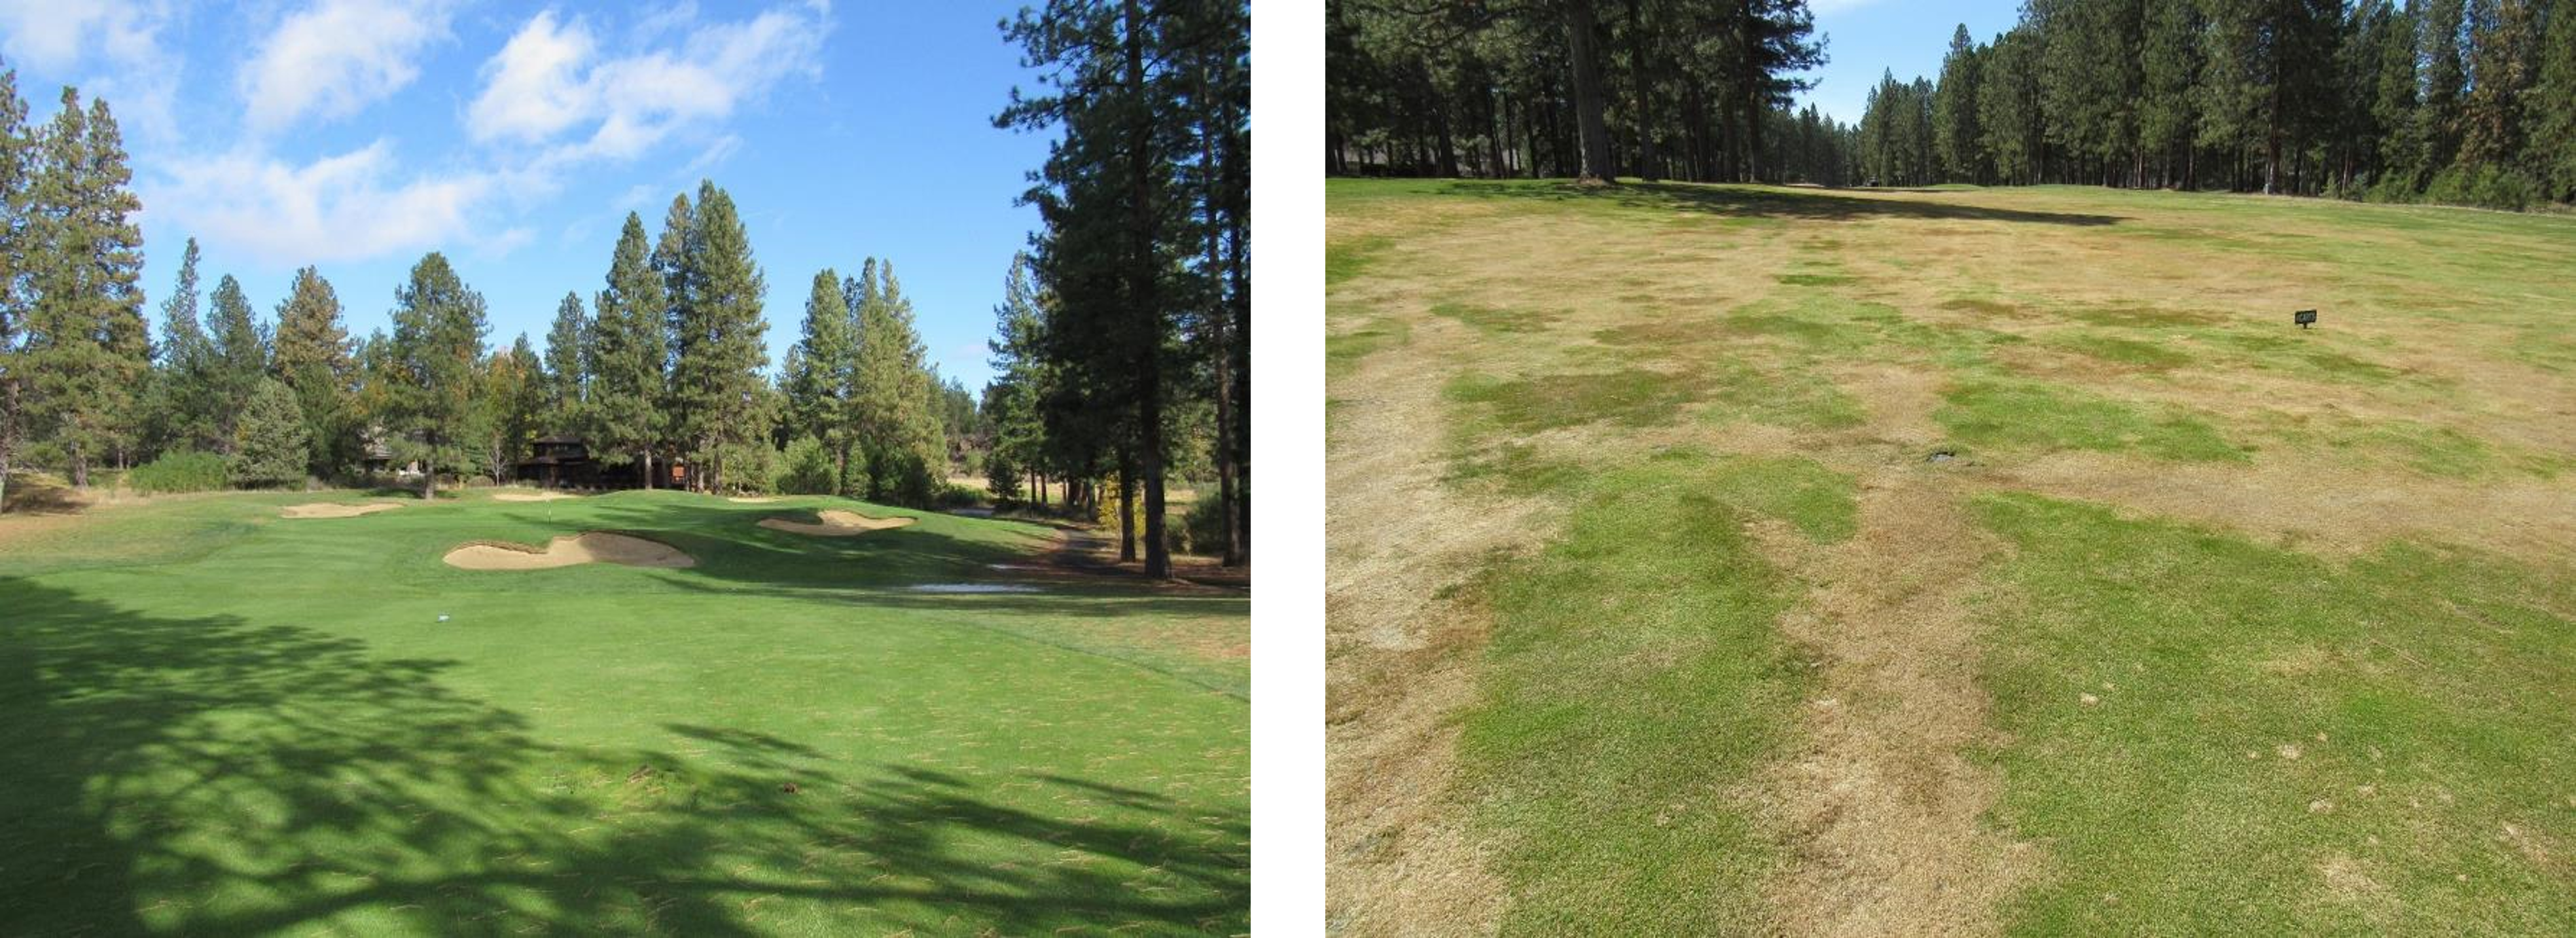 a before winter and after winter comparison of a golf course hole